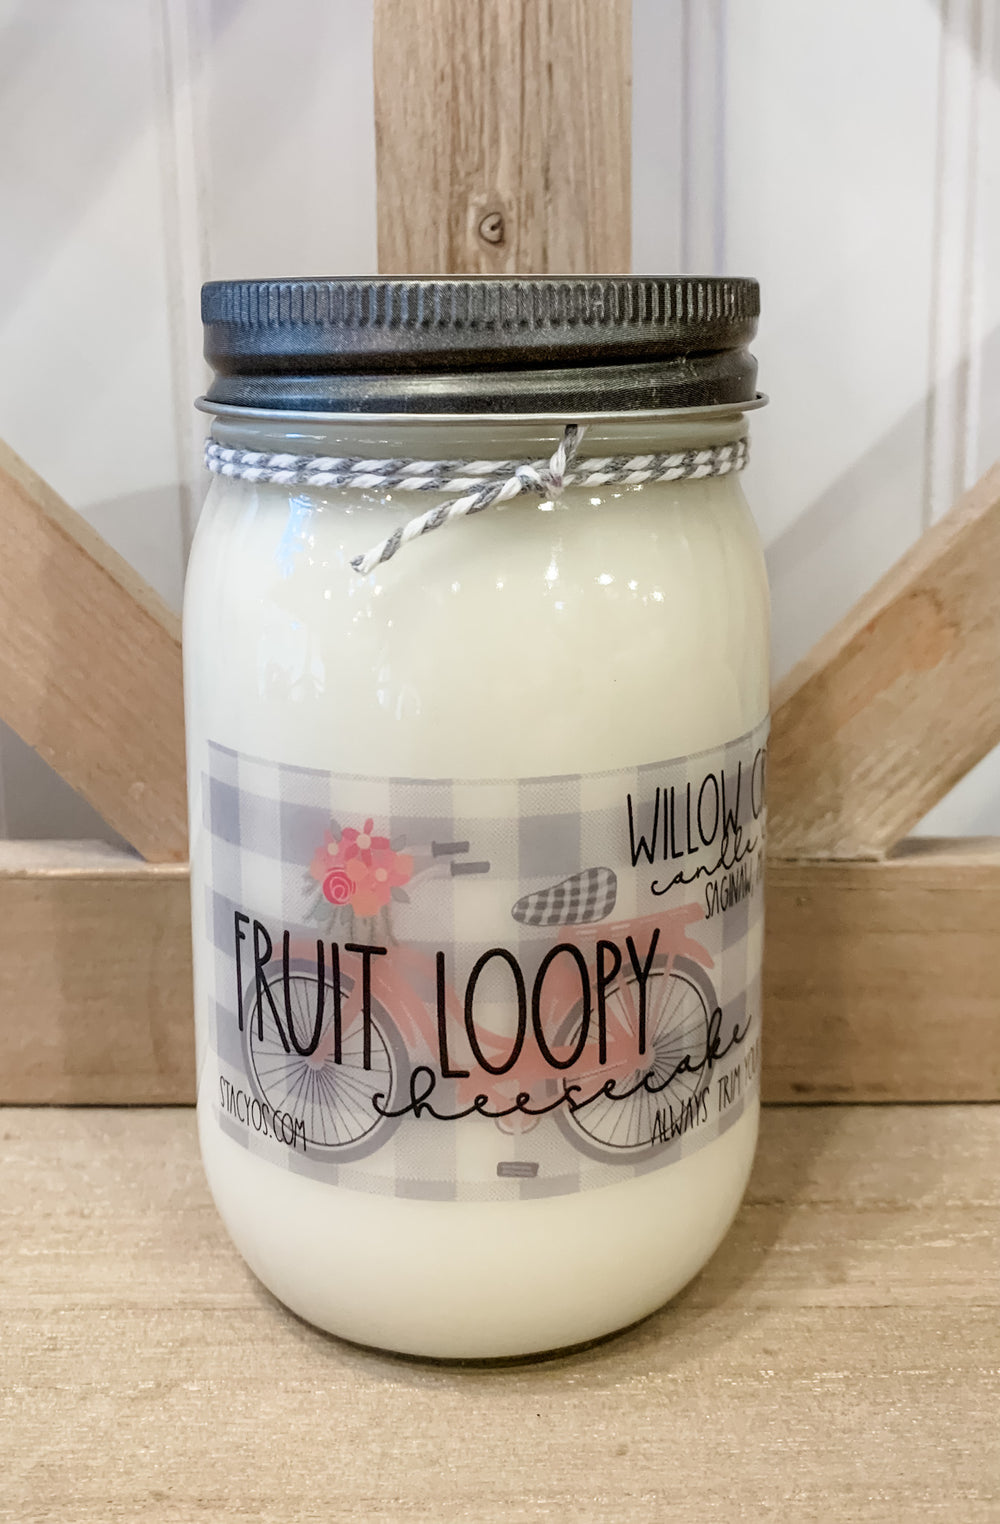 Willow Creek Fruit Loopy Cheesecake Candle